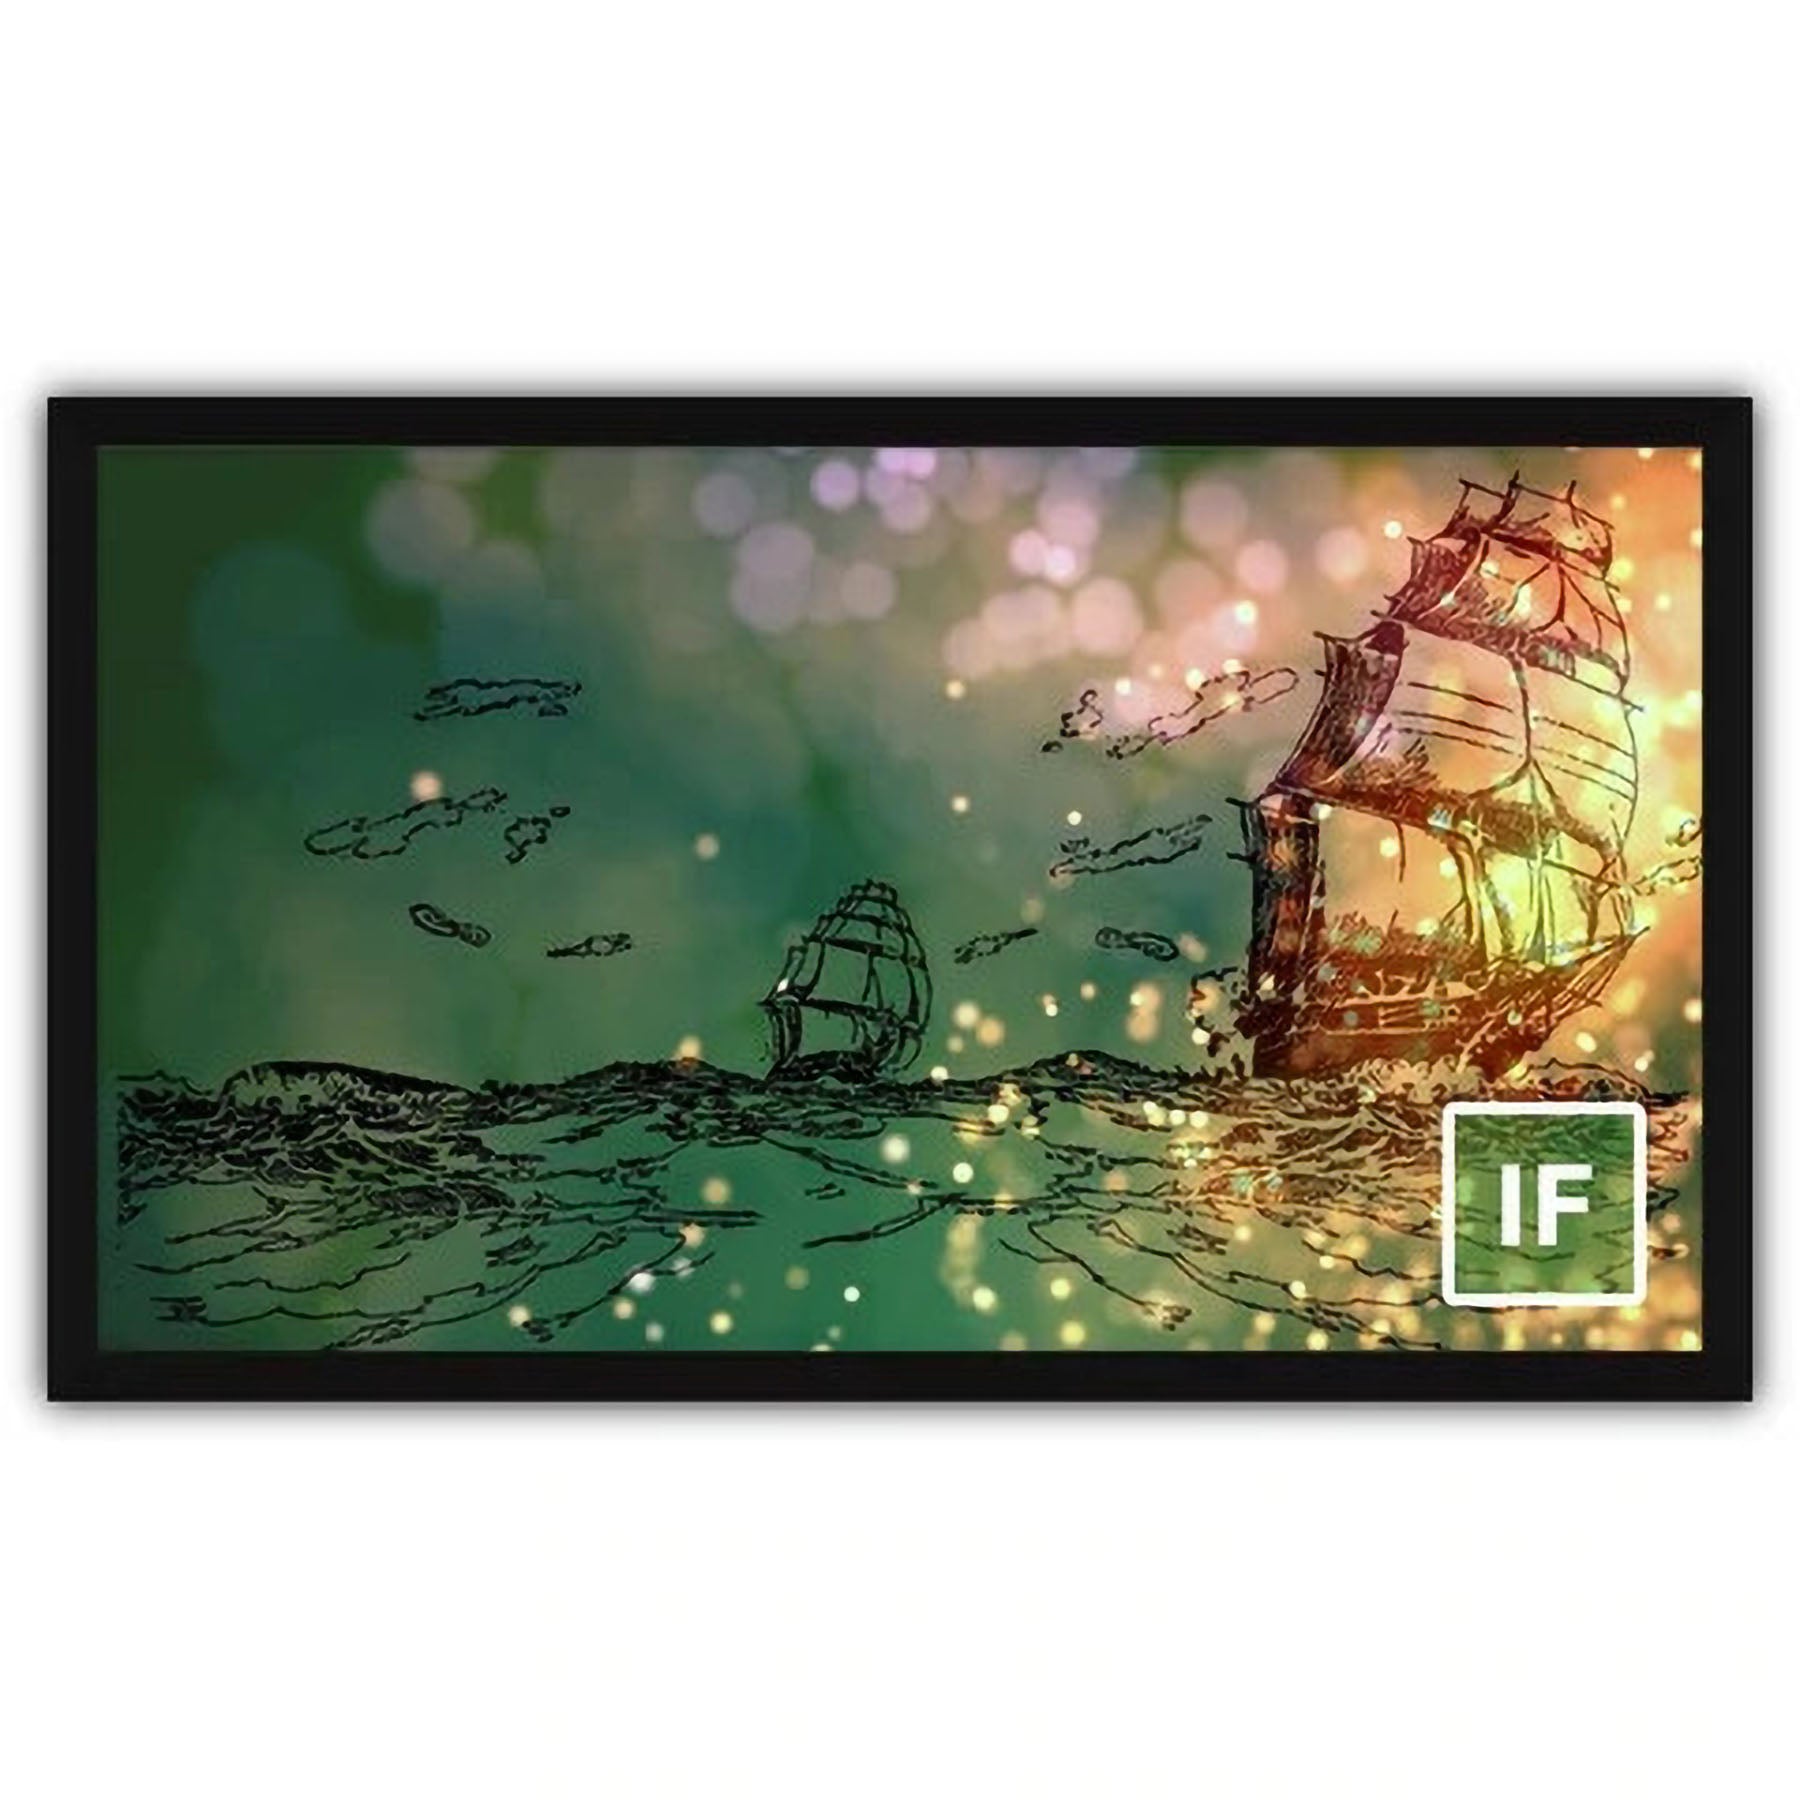 Severtson Screens Impression Series 16:9 92-inch Fixed Frame Projection Screen